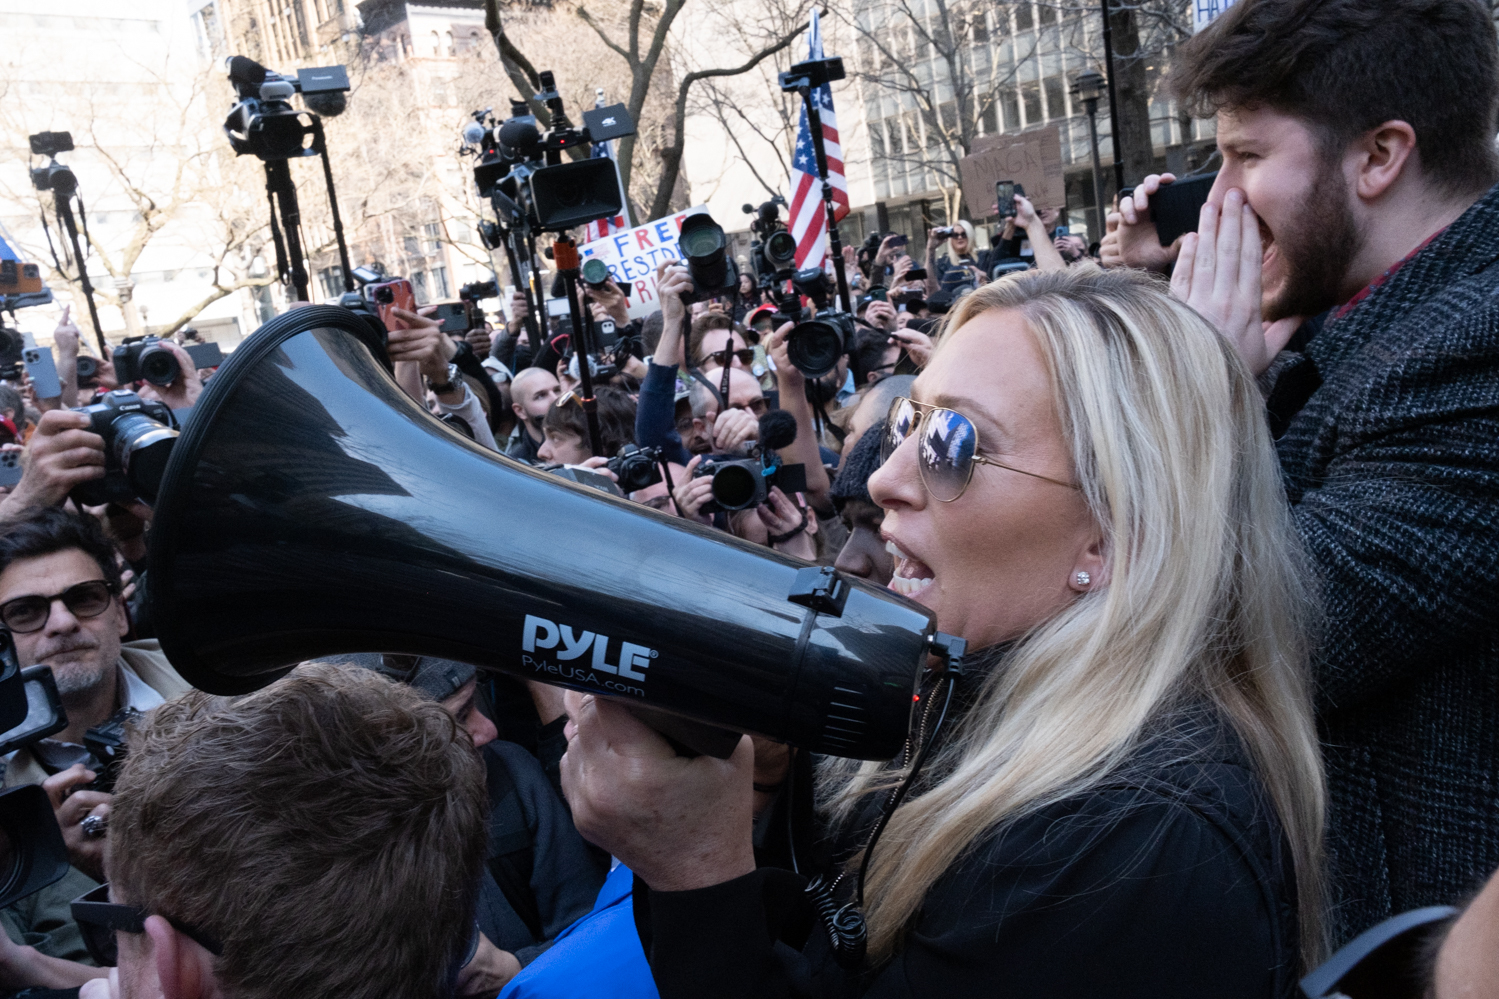 Representative Majorie Taylor Greene speaking to a crowd of protestors with a megaphone. There are many people pointing cameras towards her.